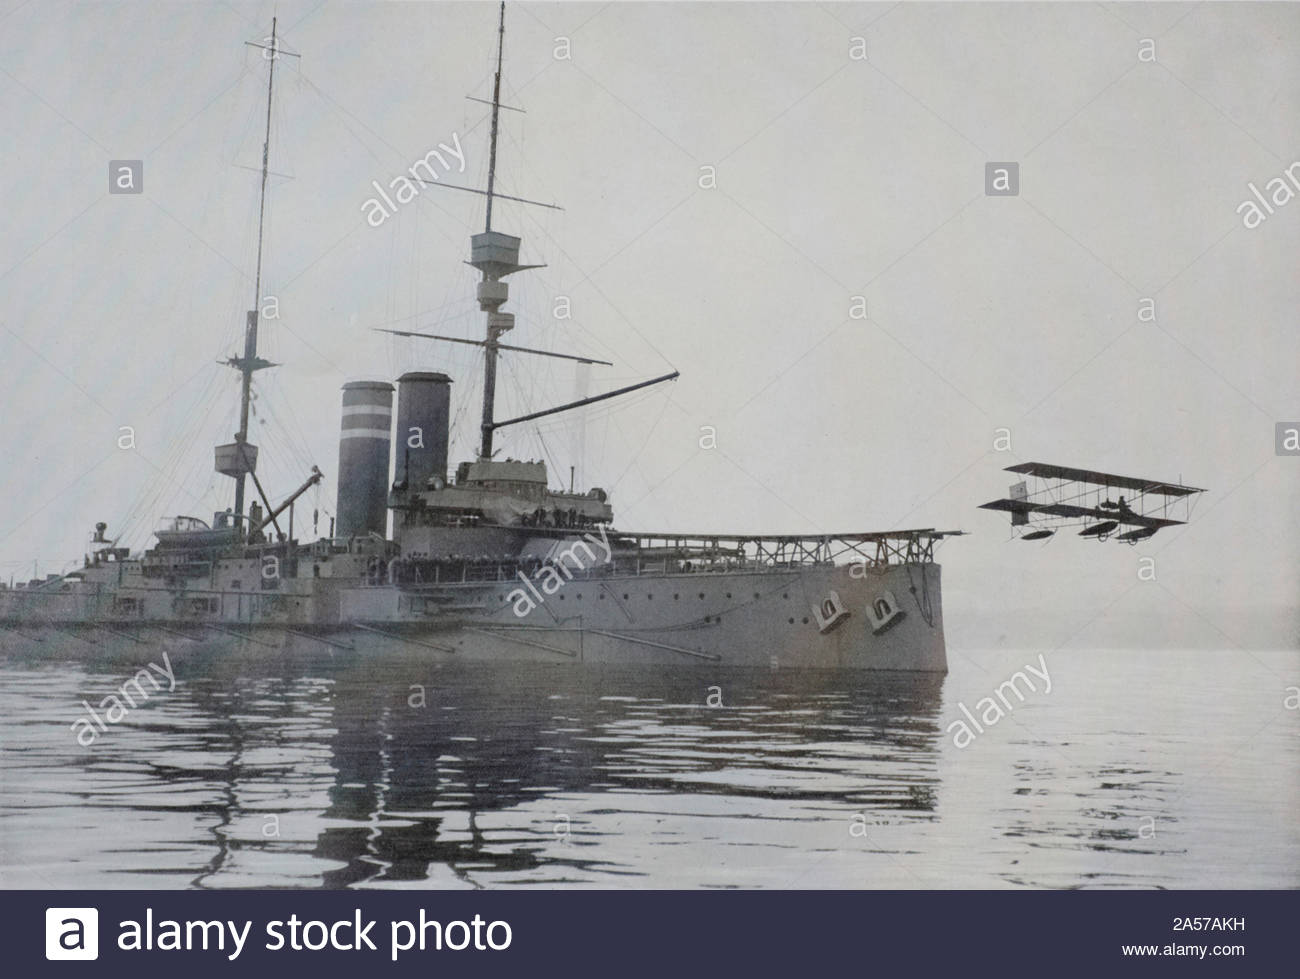 A WW1 British biplane seaplane leaves a British battleship cruiser during the raid on Cuxhaven Germany, on Christmas day 1914, vintage photograph from 1914 Stock Photo